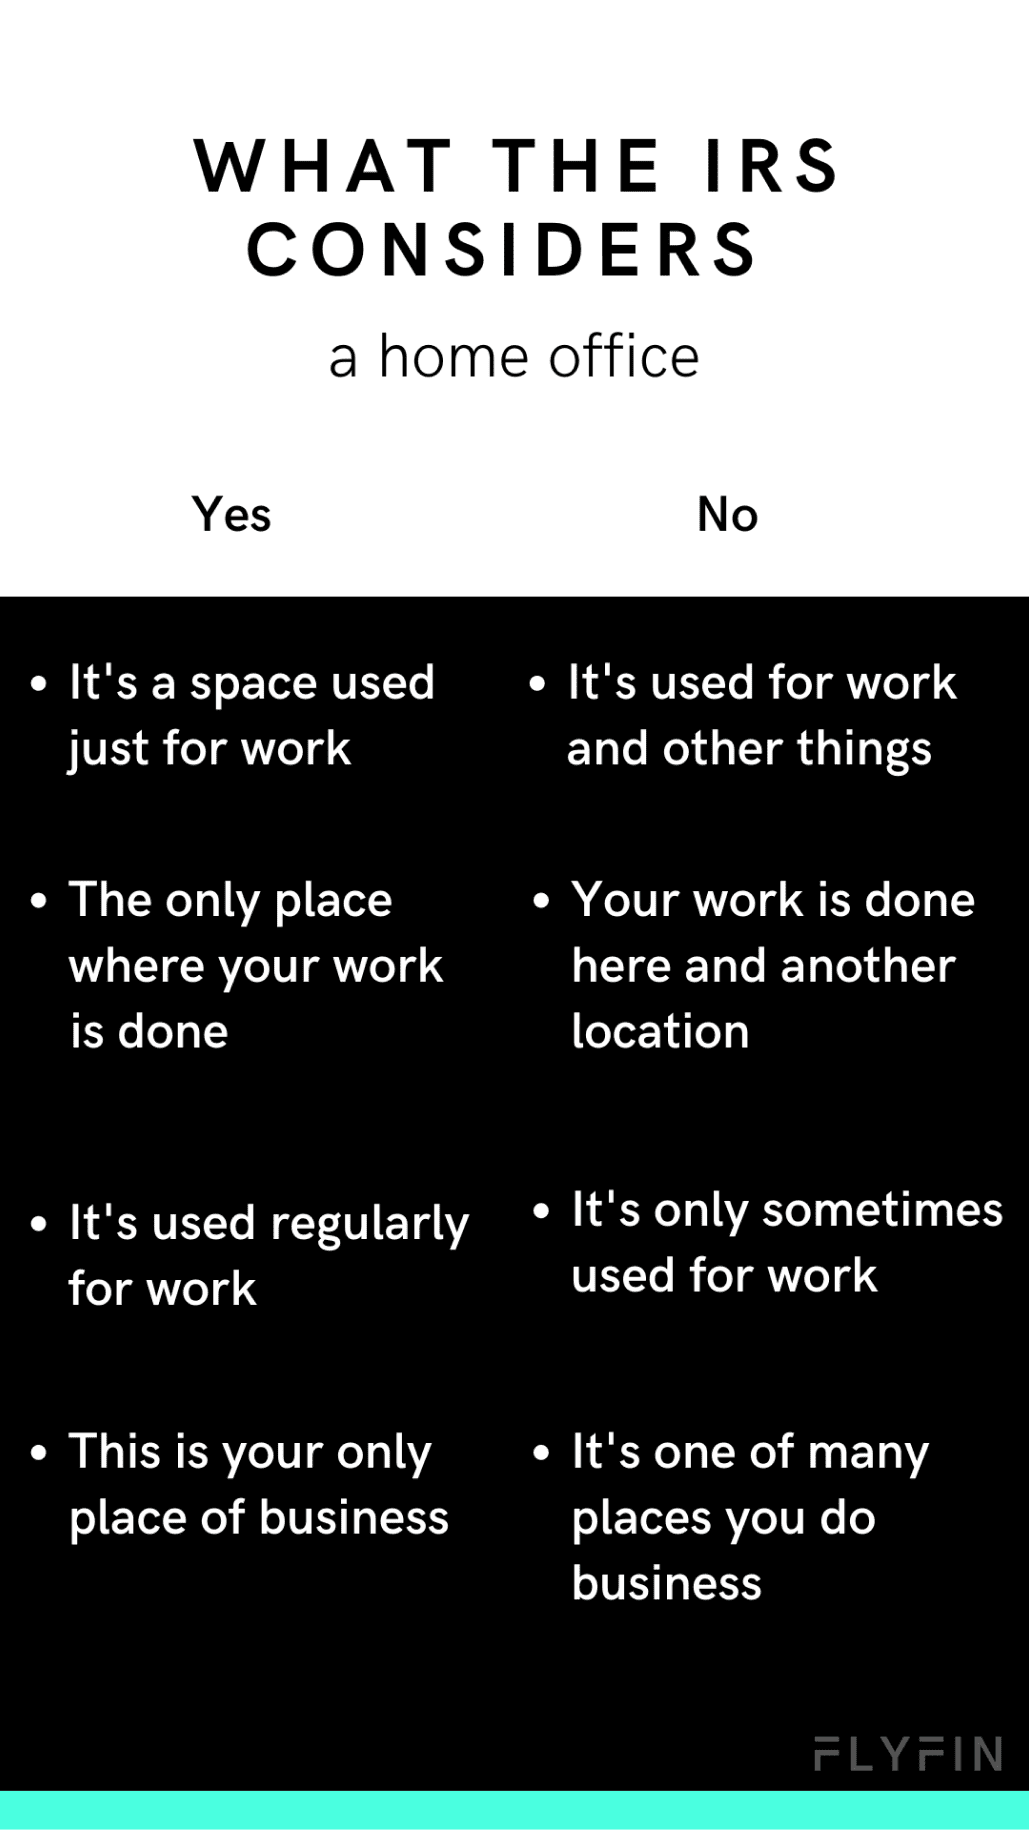 Image explaining what the IRS considers a home office for tax purposes. Criteria include exclusive use for work, regular use, and being the only place of business. Relevant for self-employed, freelancers, and those with 1099 income.